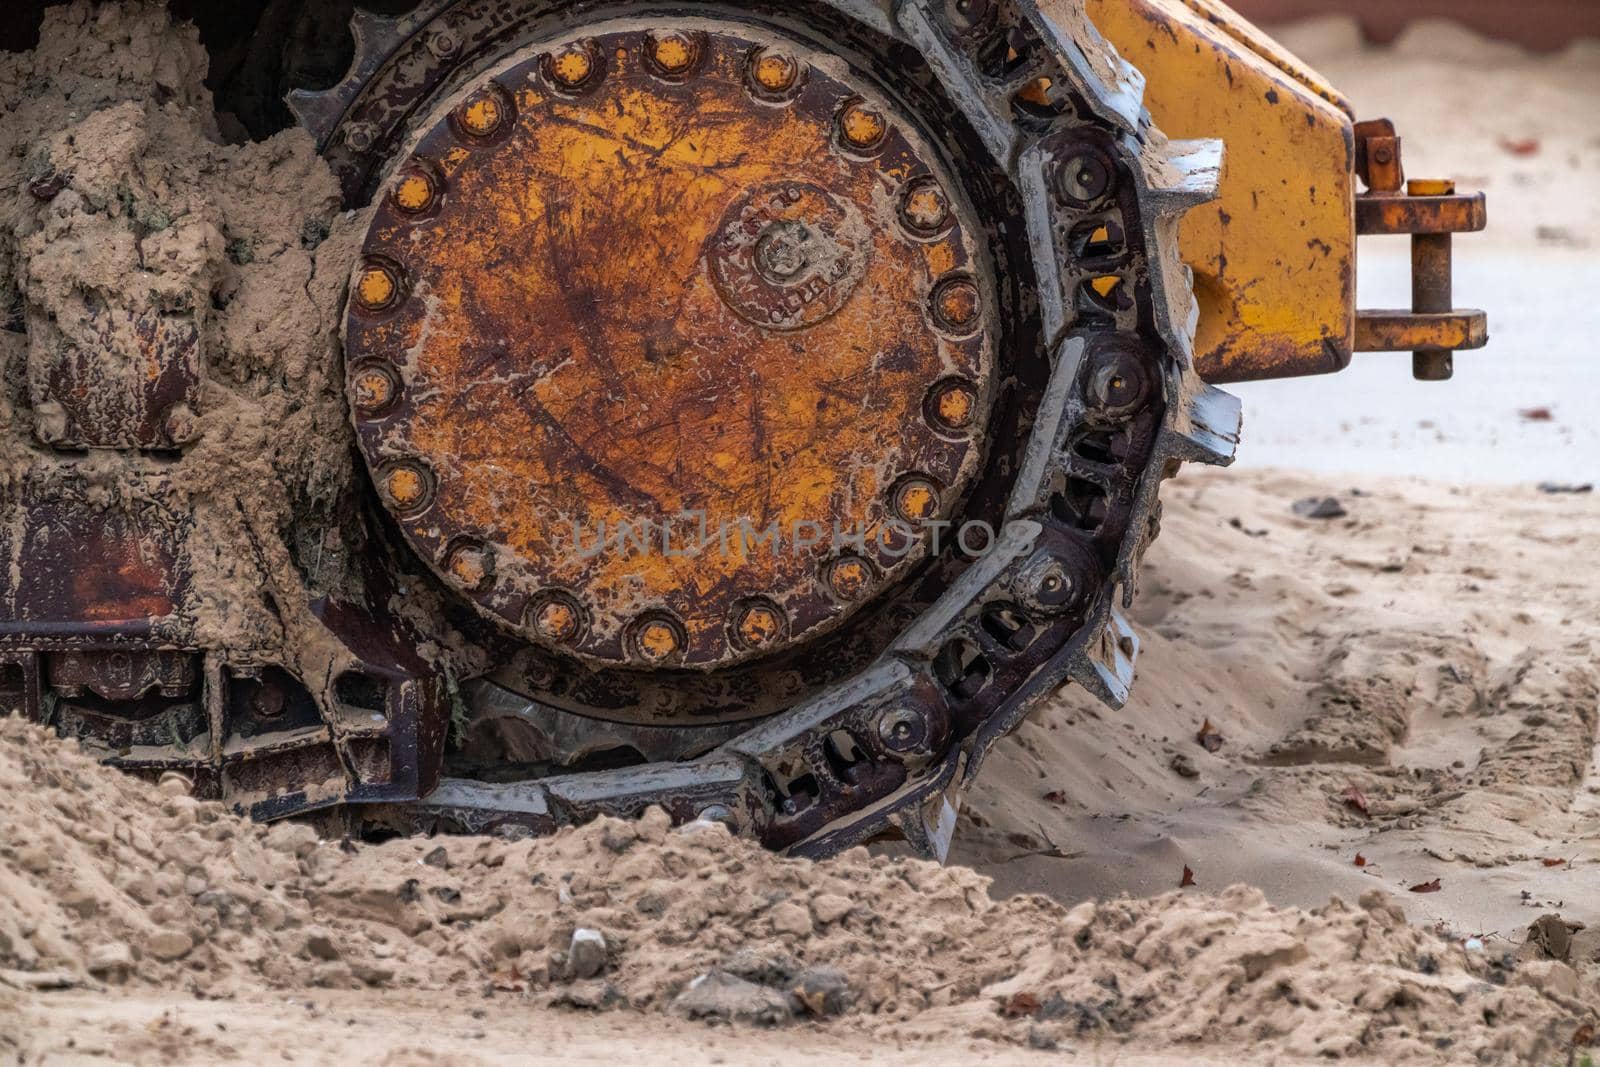 A closeup photograph of the track of an old large industrial yellow bulldozer machine weathered, rusty and worn sitting on a beach in Chicago. by lapse_life